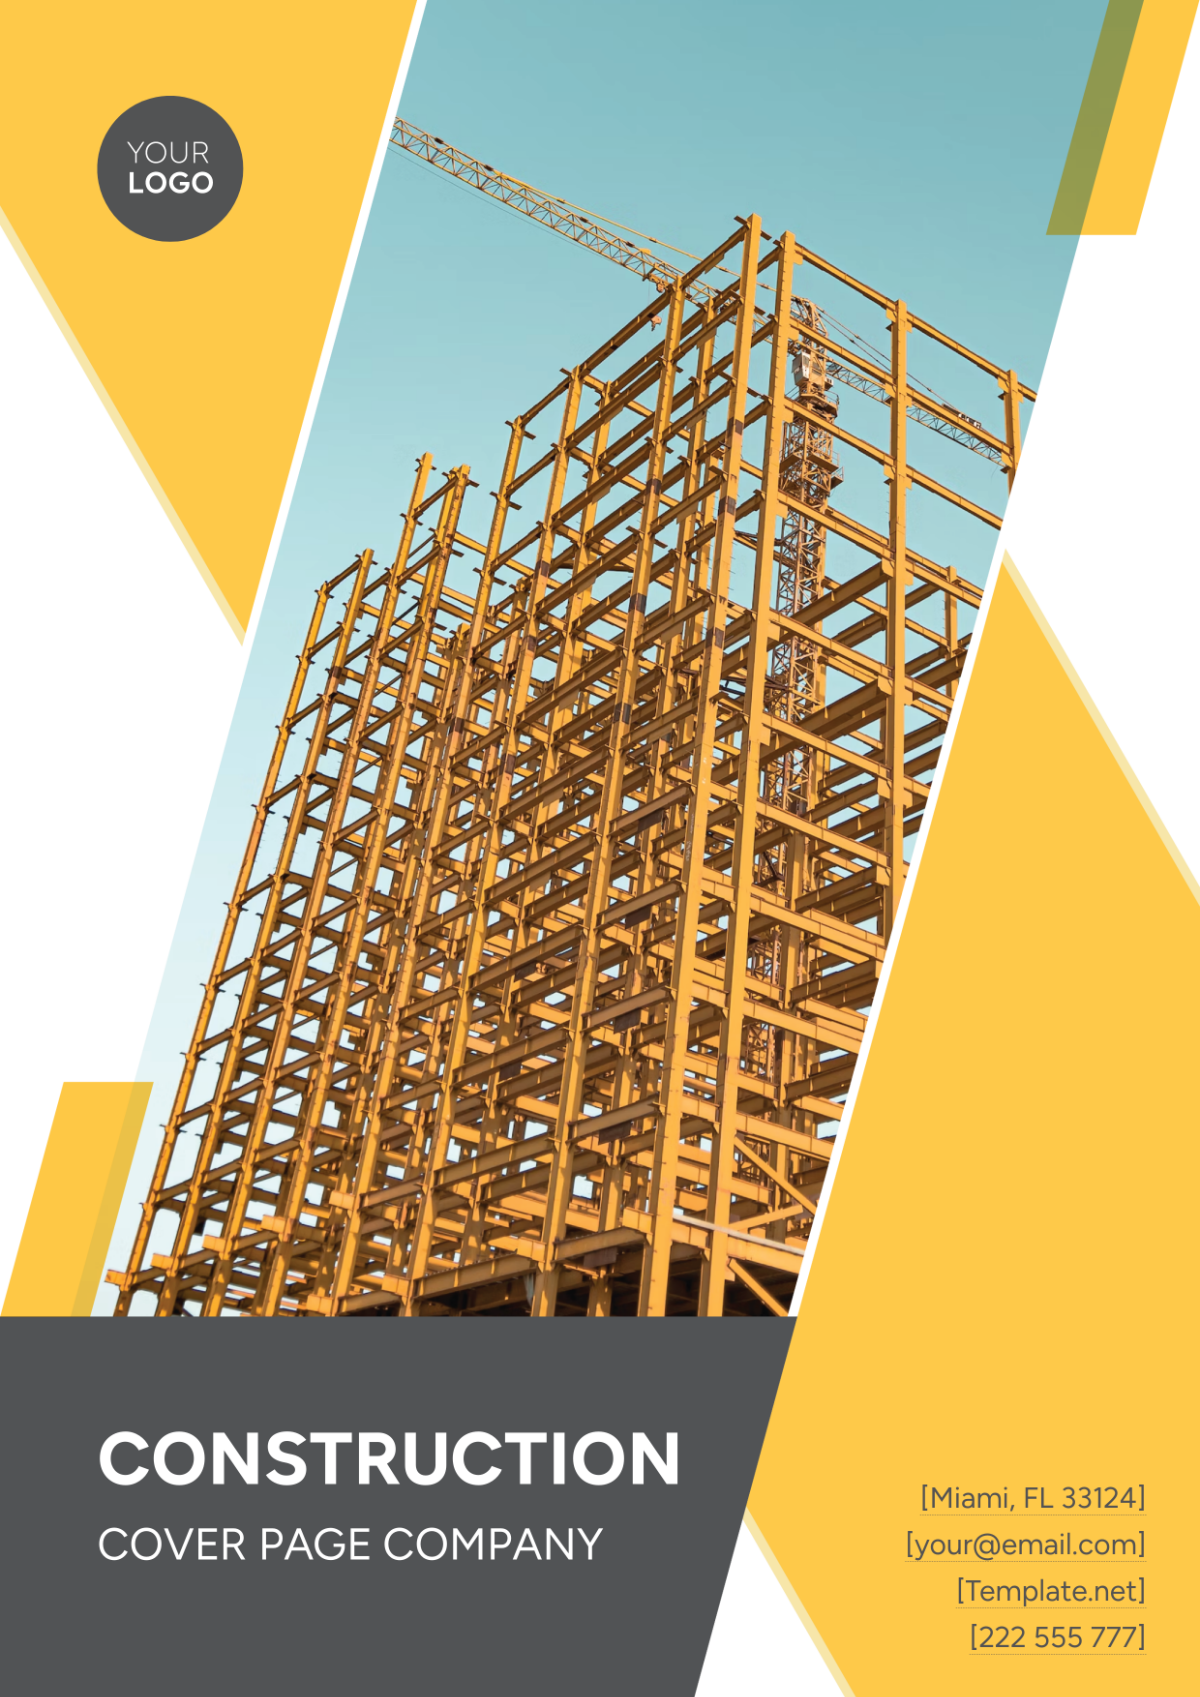 Construction Cover Page Company Template